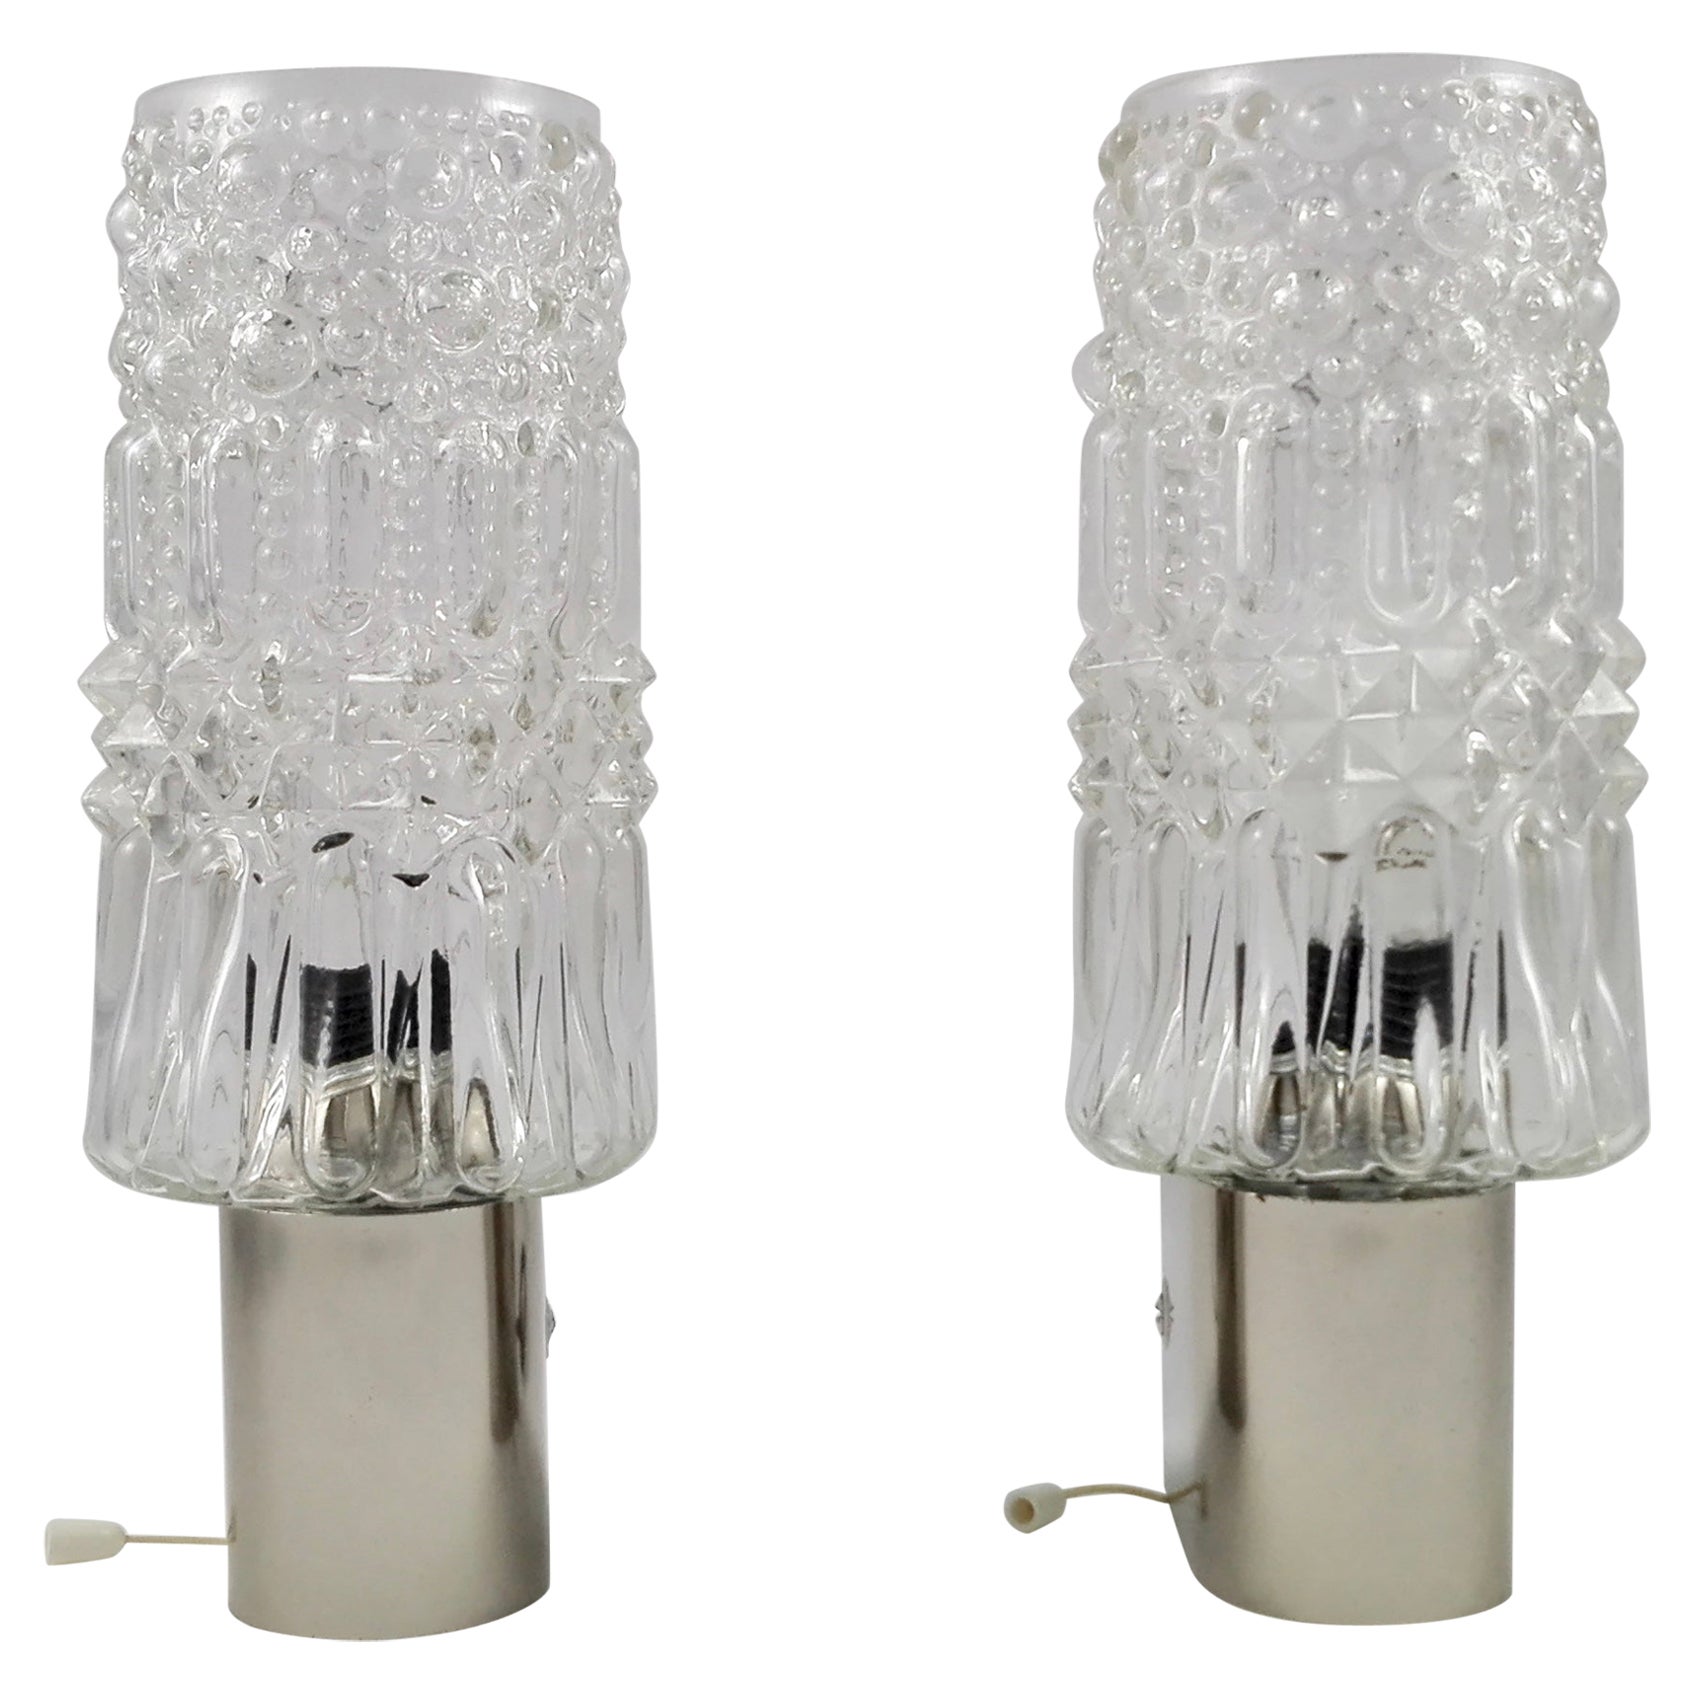 1970s chrome and faceted thick crystal shades wall lamps. Set of two.